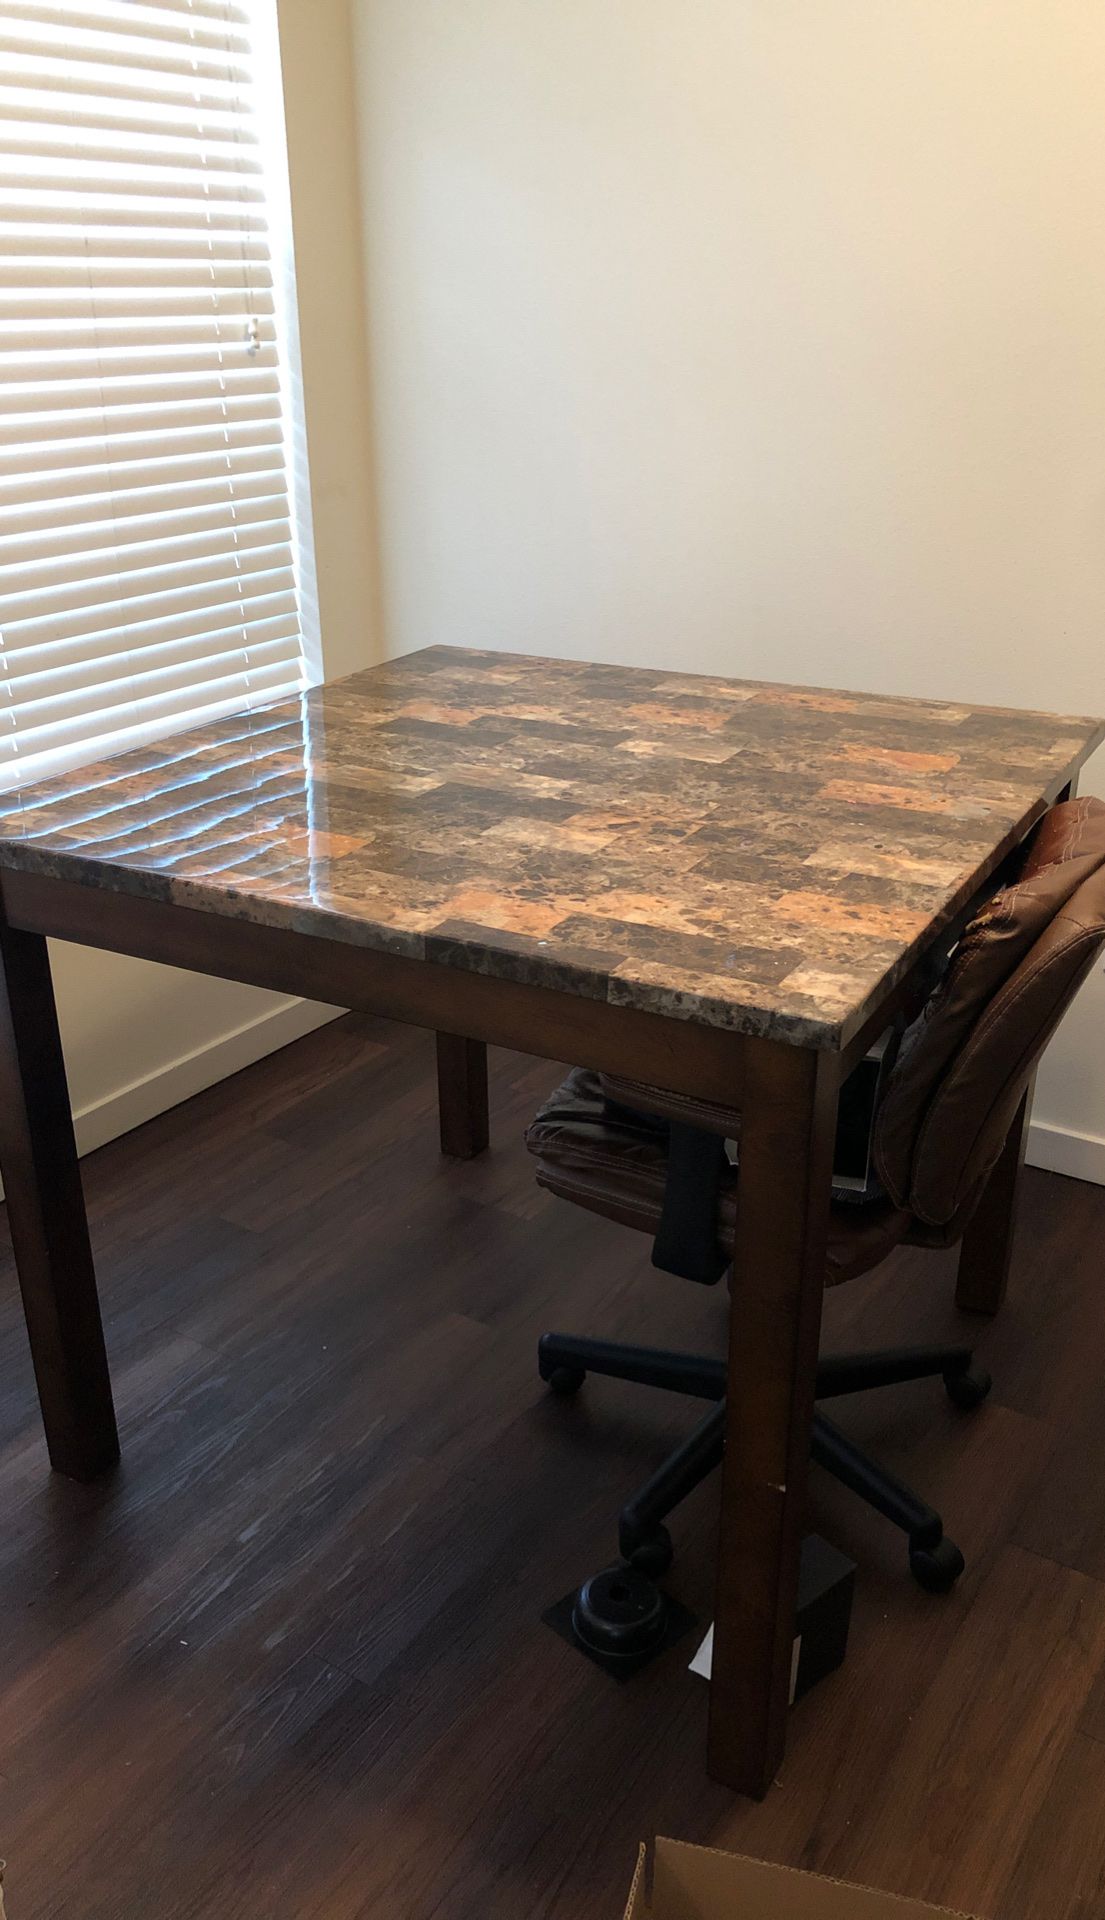 Wood with Vinyl kitchen table